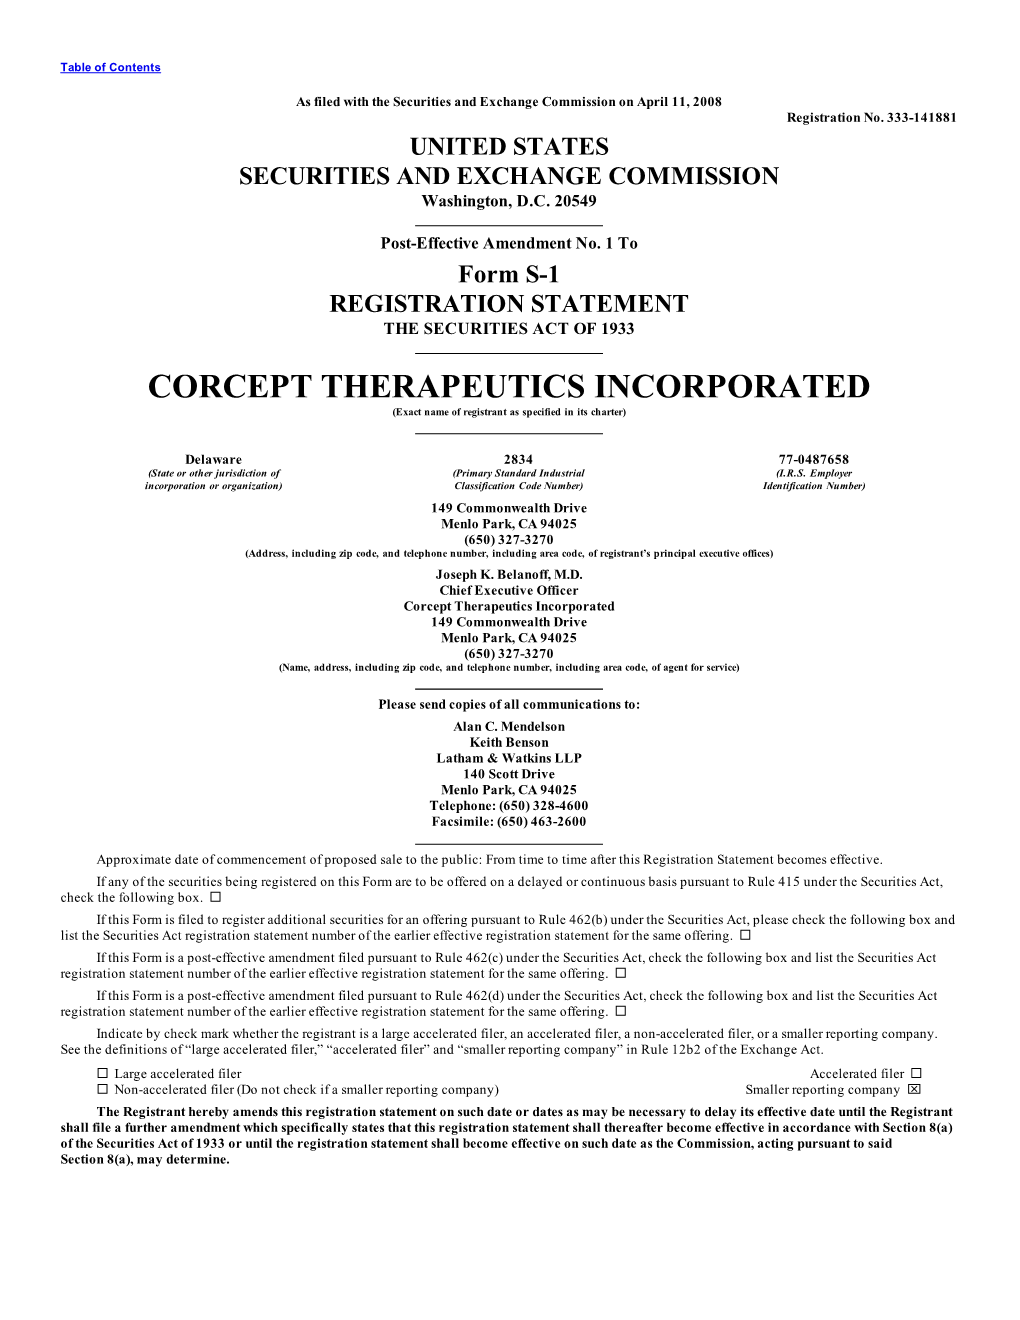 CORCEPT THERAPEUTICS INCORPORATED (Exact Name of Registrant As Specified in Its Charter)